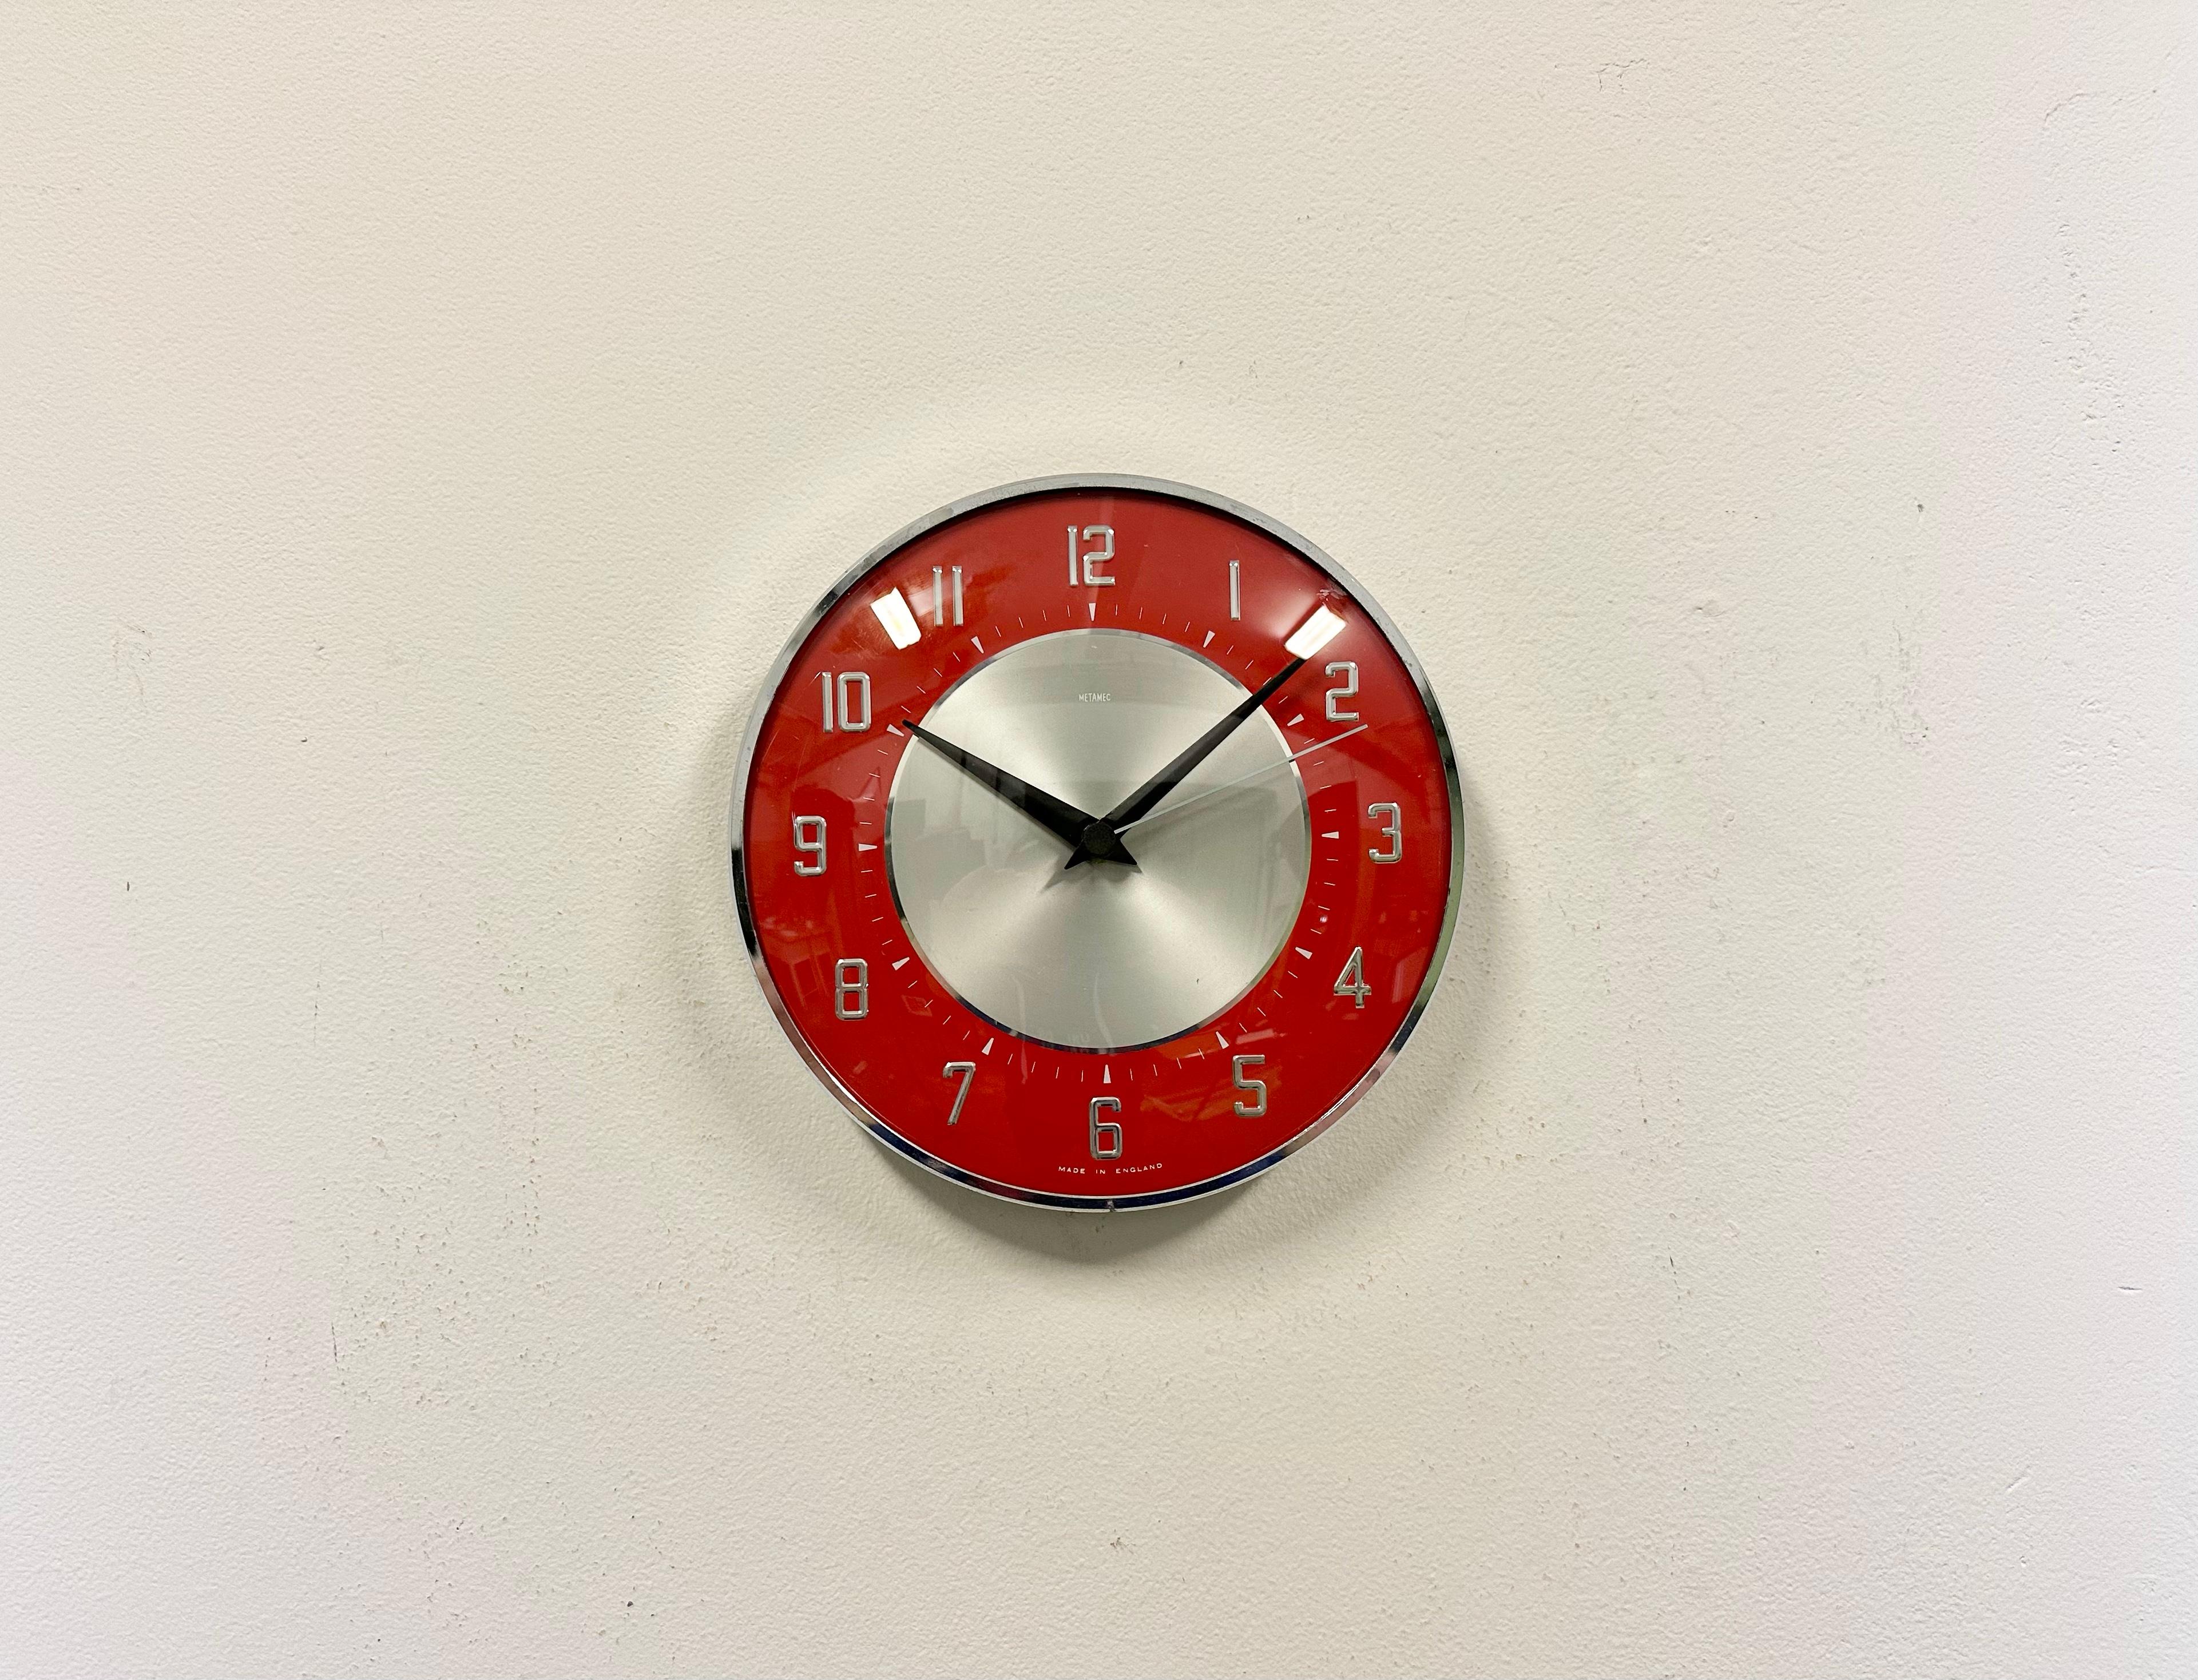 Wall clock produced by Metamec in England during the 1970s. It features a red-silver bakelite clock face,a chrome-plated frame and a convex clear glass cover. The piece has been converted into a battery-powered clockwork and requires only one